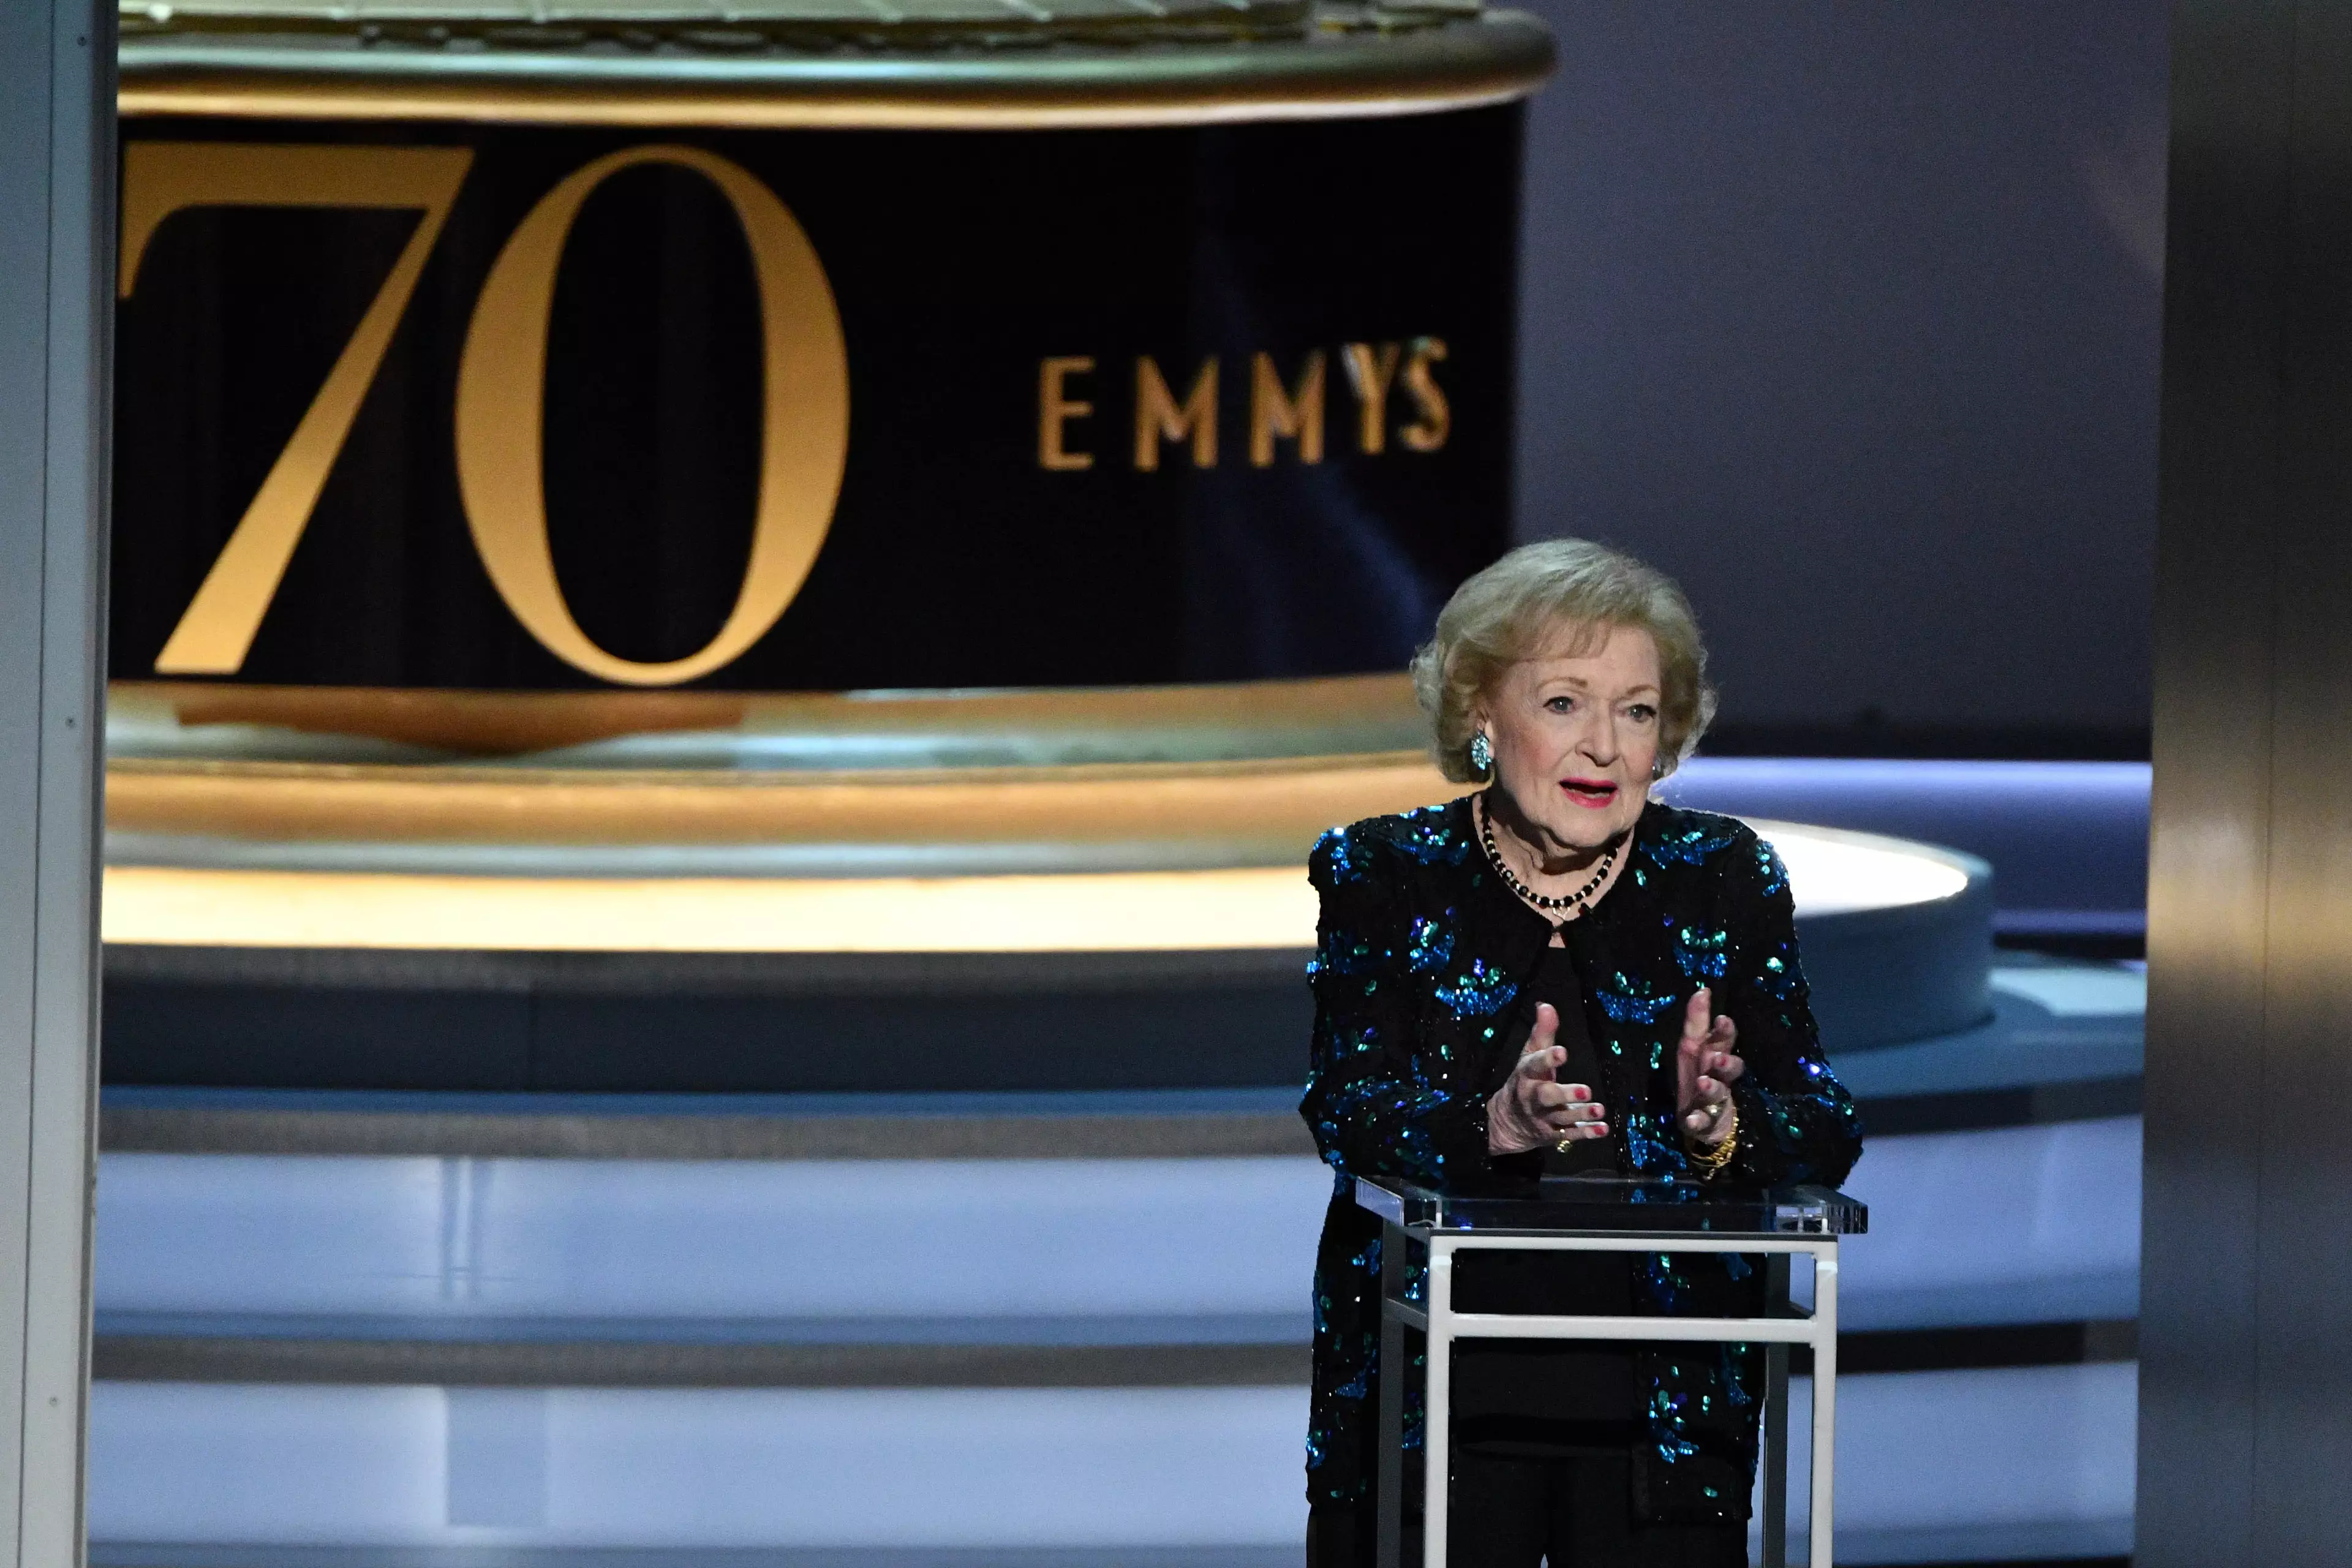 Betty White at the 70th Emmy Awards.